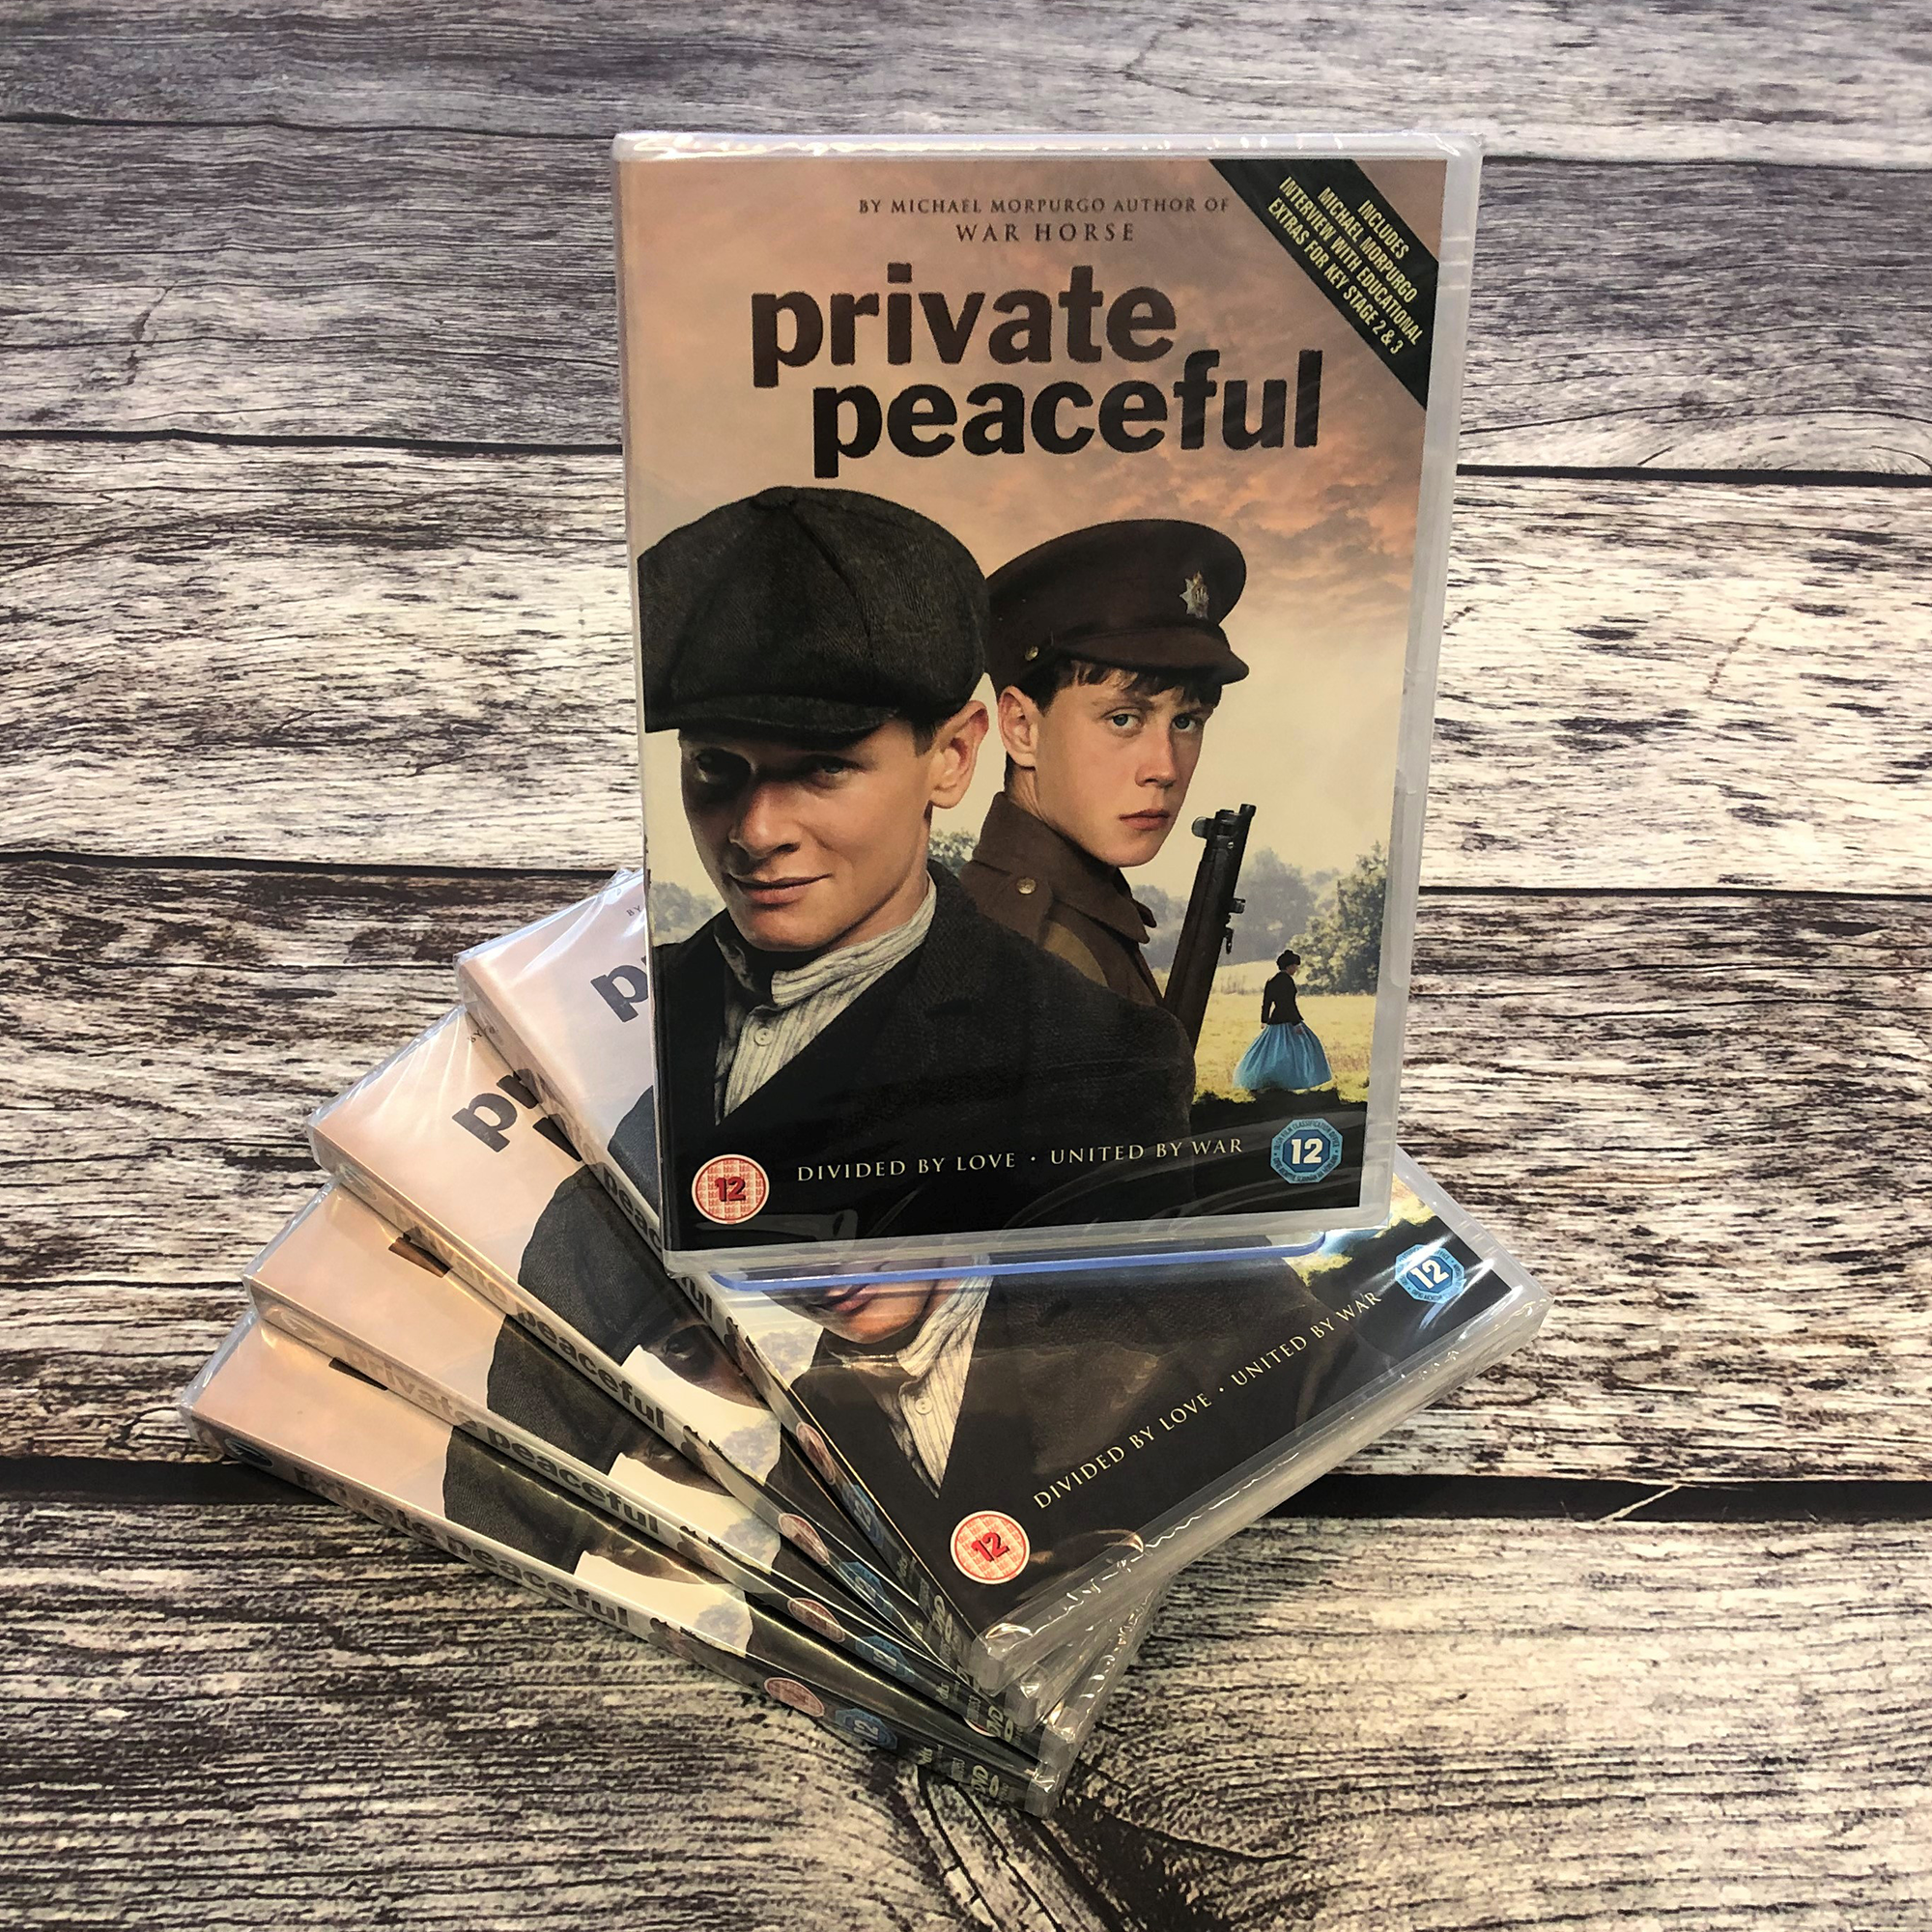 Michael Morpurgo Month: Win 1 of 10 Private Peaceful DVDs for your school!